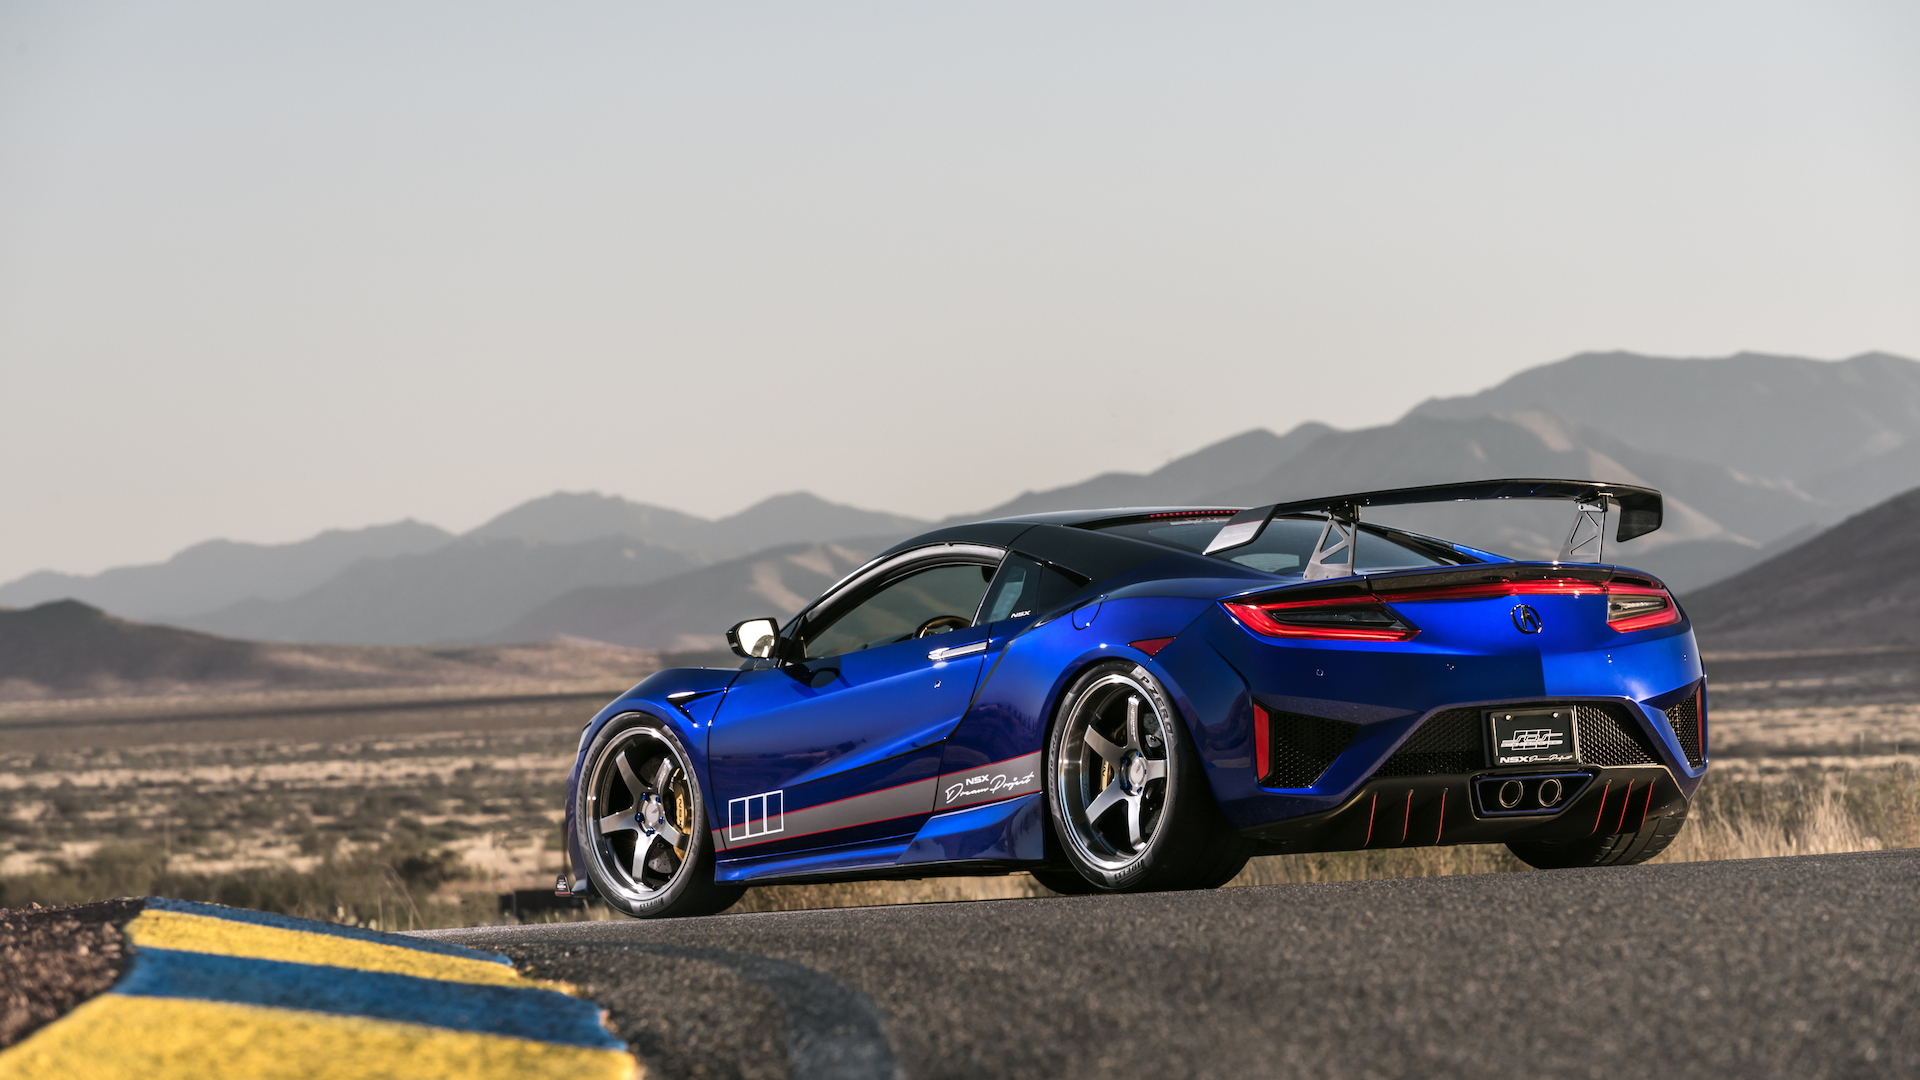 Science of Speed custom Acura NSX debuted at 2017 SEMA show 